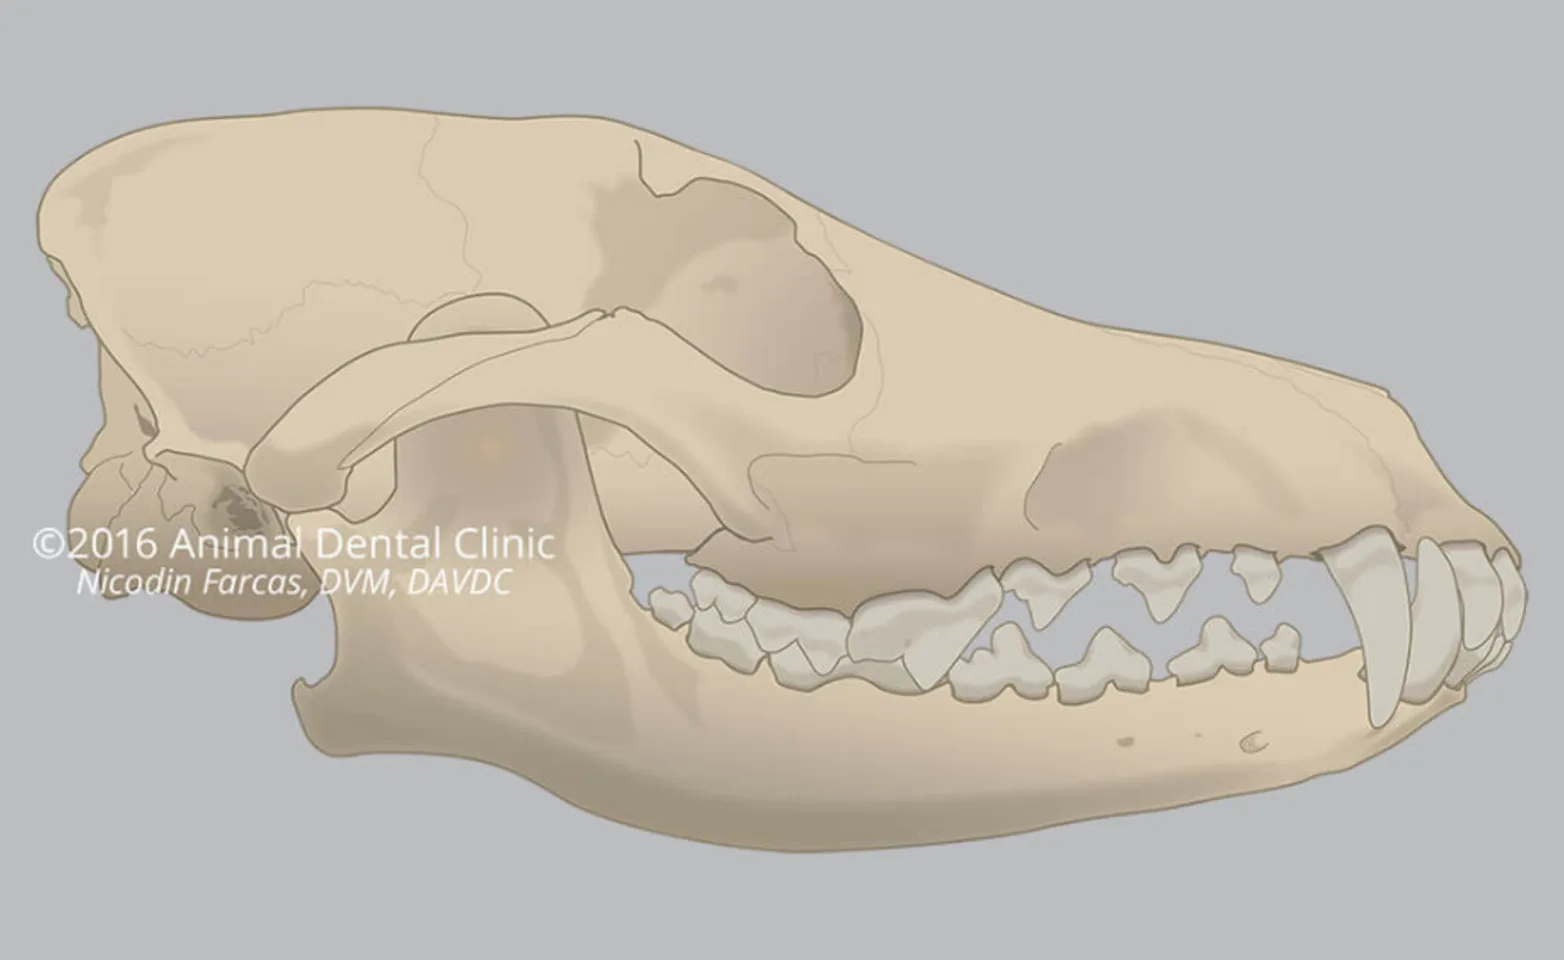 Diagram of an animal's jaw